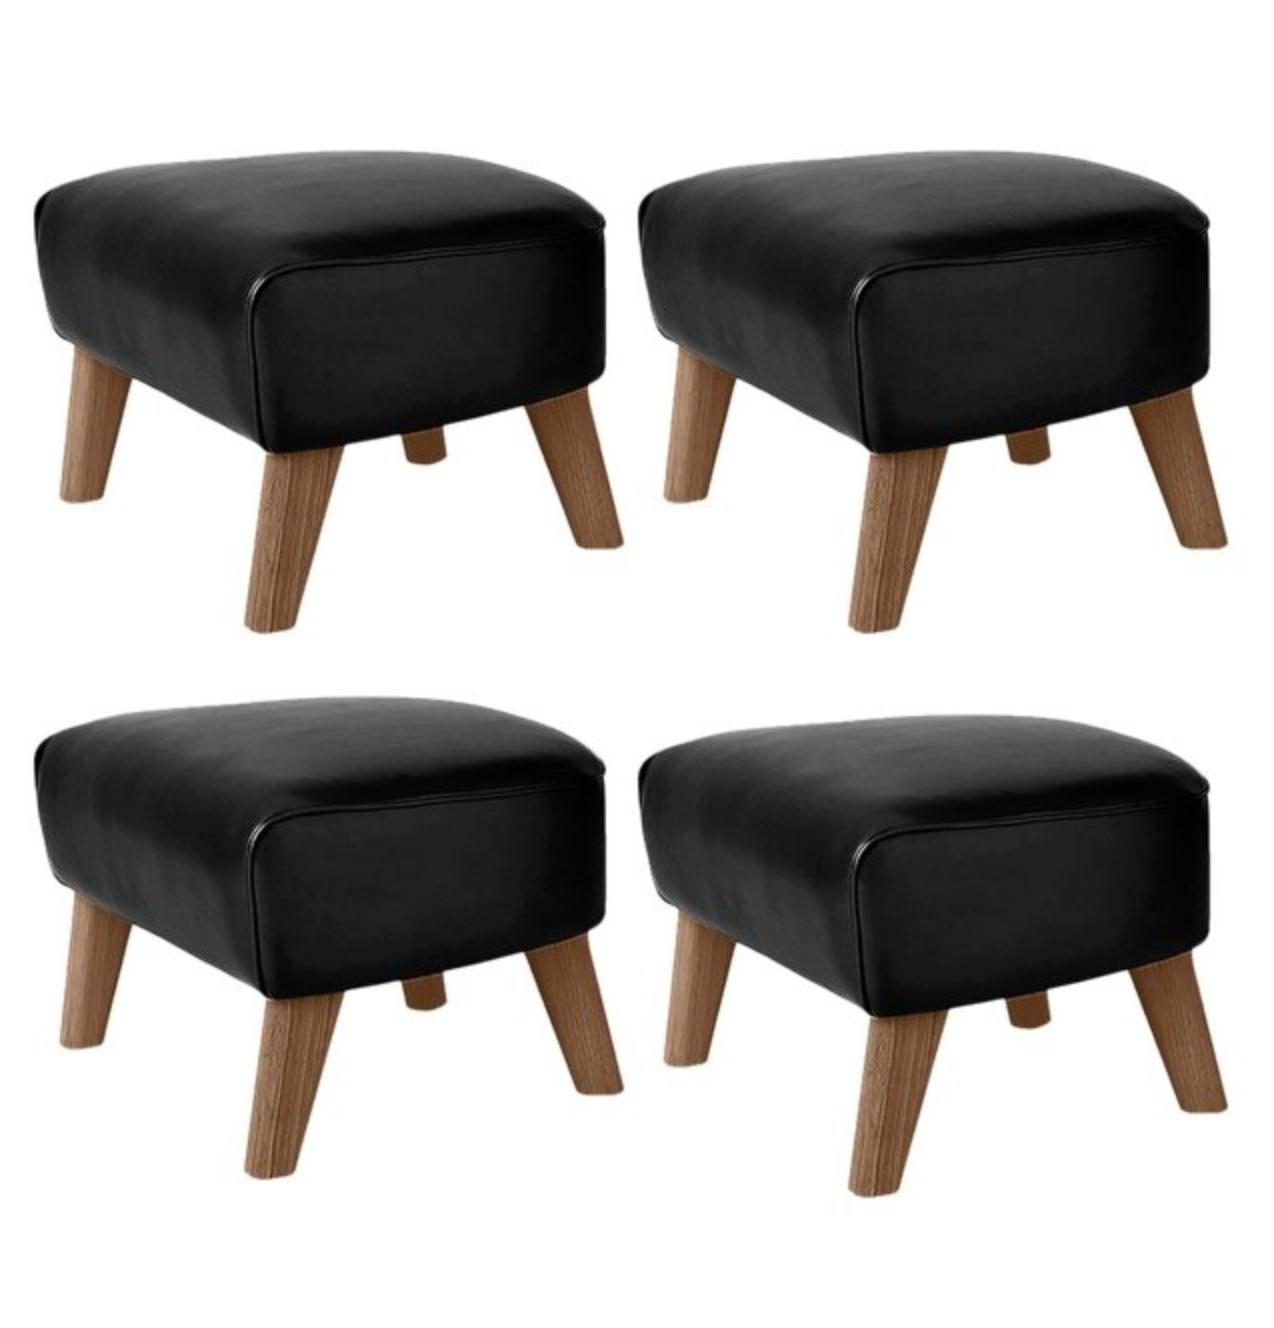 Set of 4 black leather and smoked oak my own chair footstools by lassen.
Dimensions: W 56 x D 58 x H 40 cm 
Materials: Leather

The My Own Chair Footstool has been designed in the same spirit as Flemming Lassen’s original iconic chair,